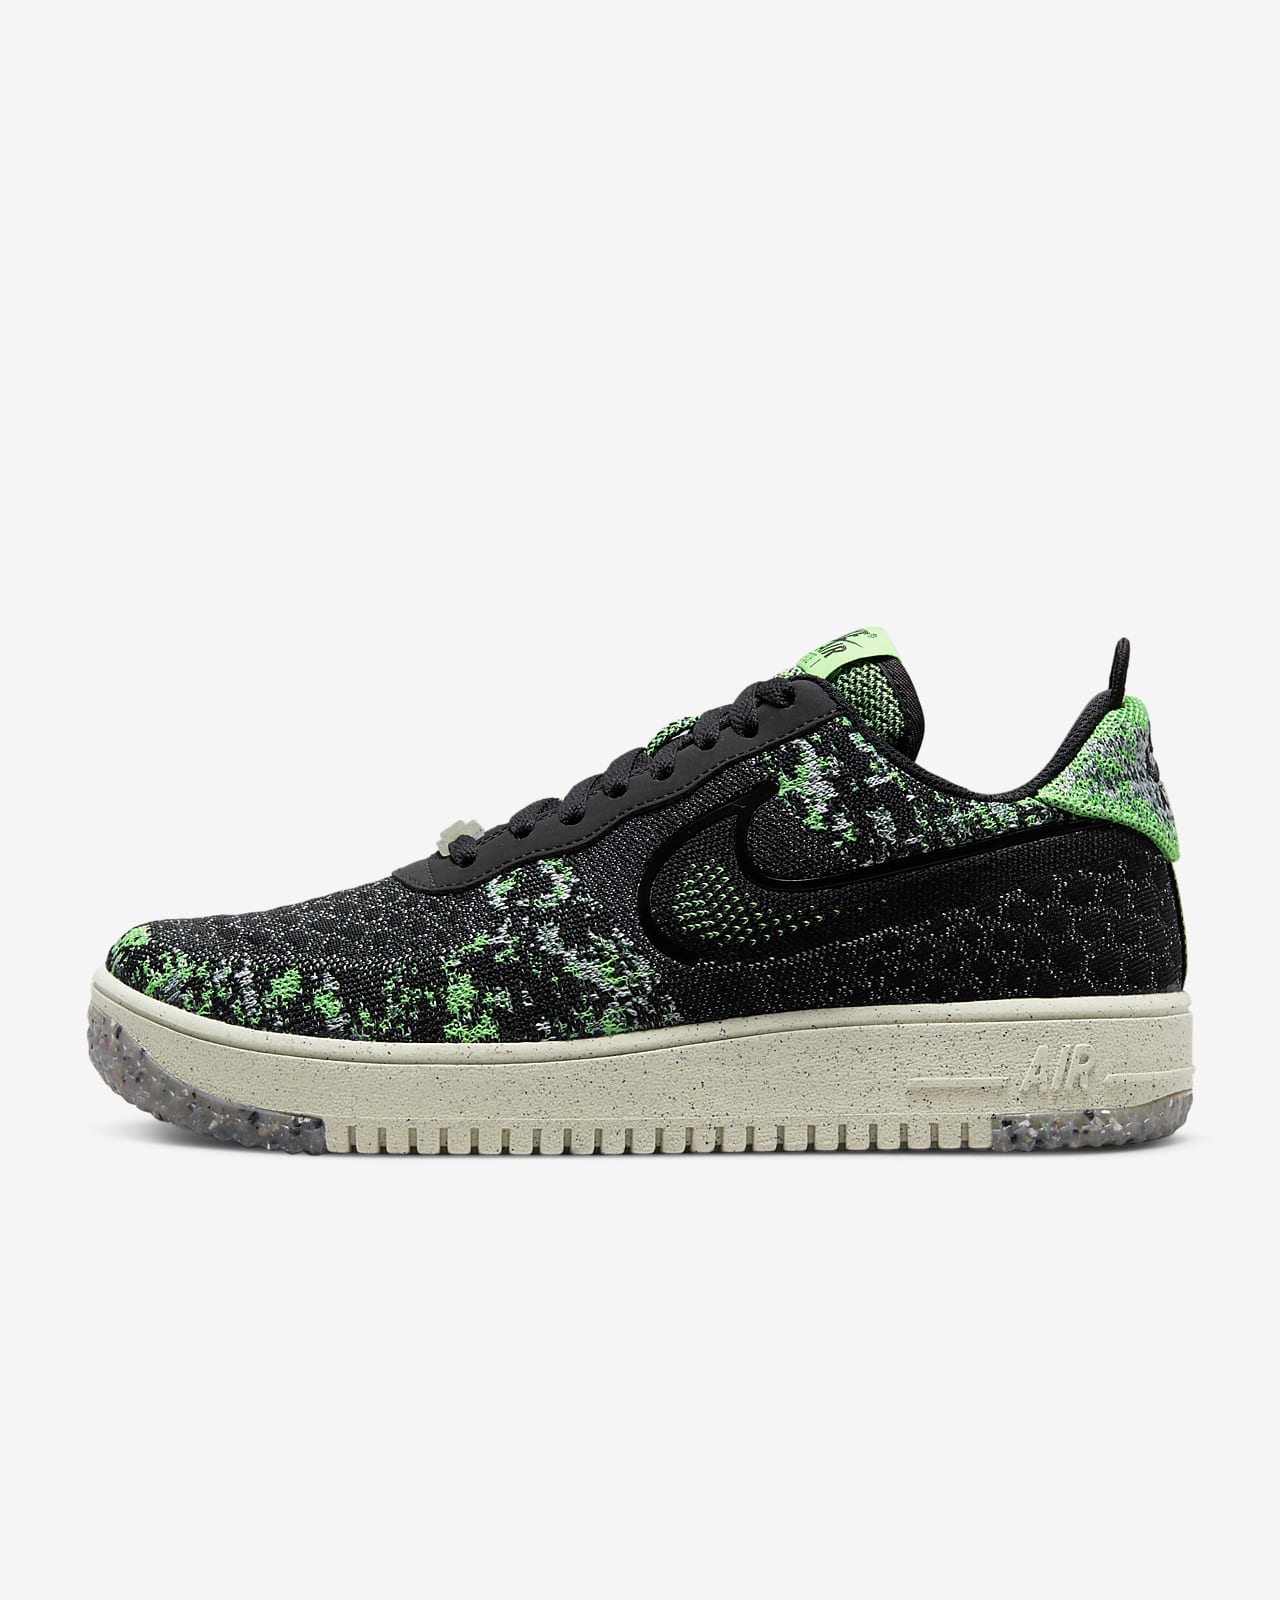 Nike Air Force 1 Crater Flyknit Next 